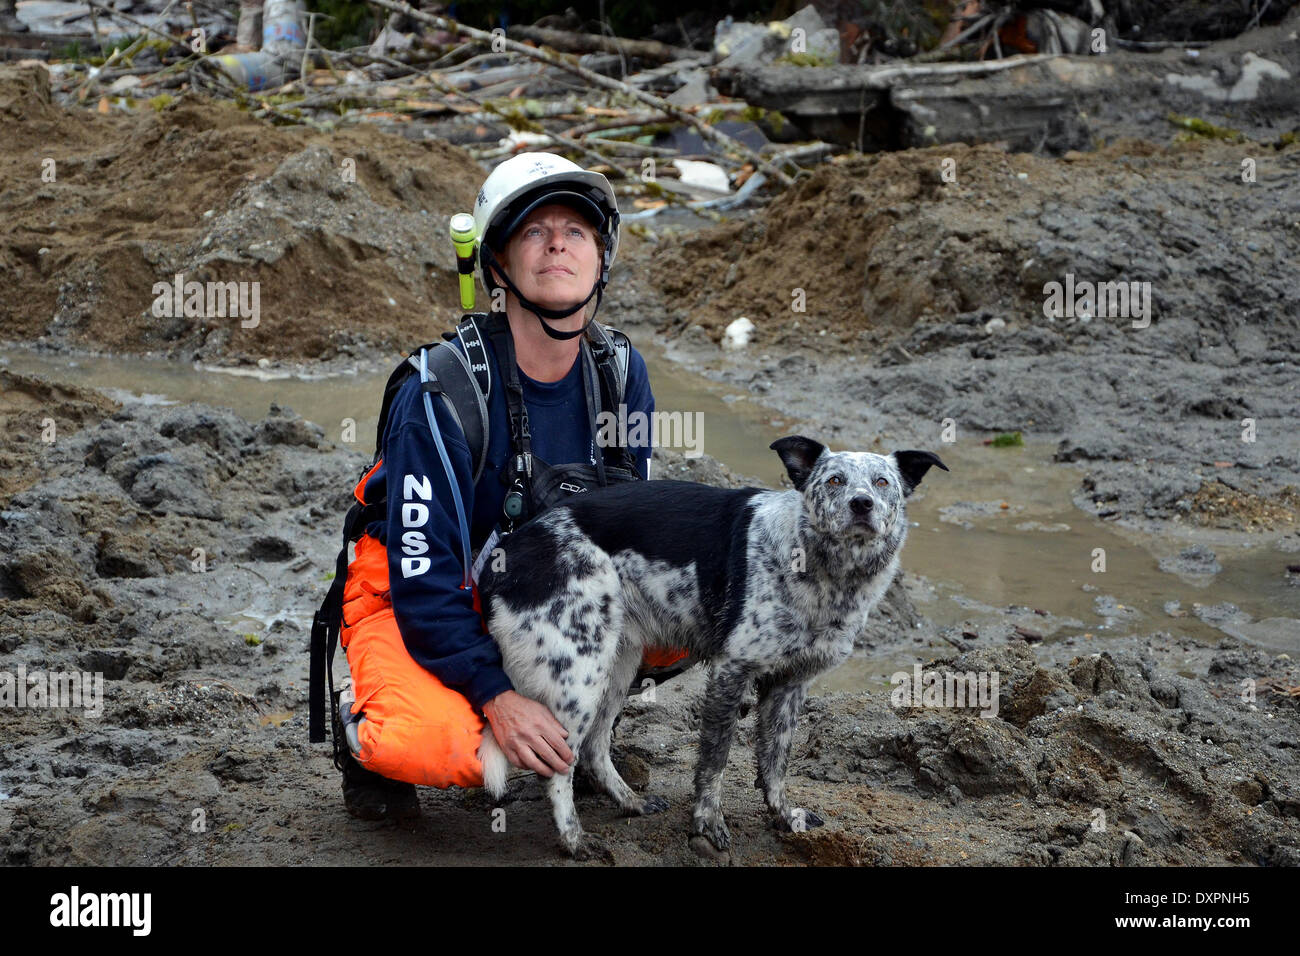 Oso, Washington, USA . 28th Mar, 2014. Lisa Bishop and her dog, Cody, from Northwest Disaster Search Dogs, during efforts to locate victims of a massive landslide that killed at least 28 people and destroyed a small riverside village in northwestern Washington state March 27, 2014 in Oso, Washington. Credit:  Planetpix/Alamy Live News Stock Photo